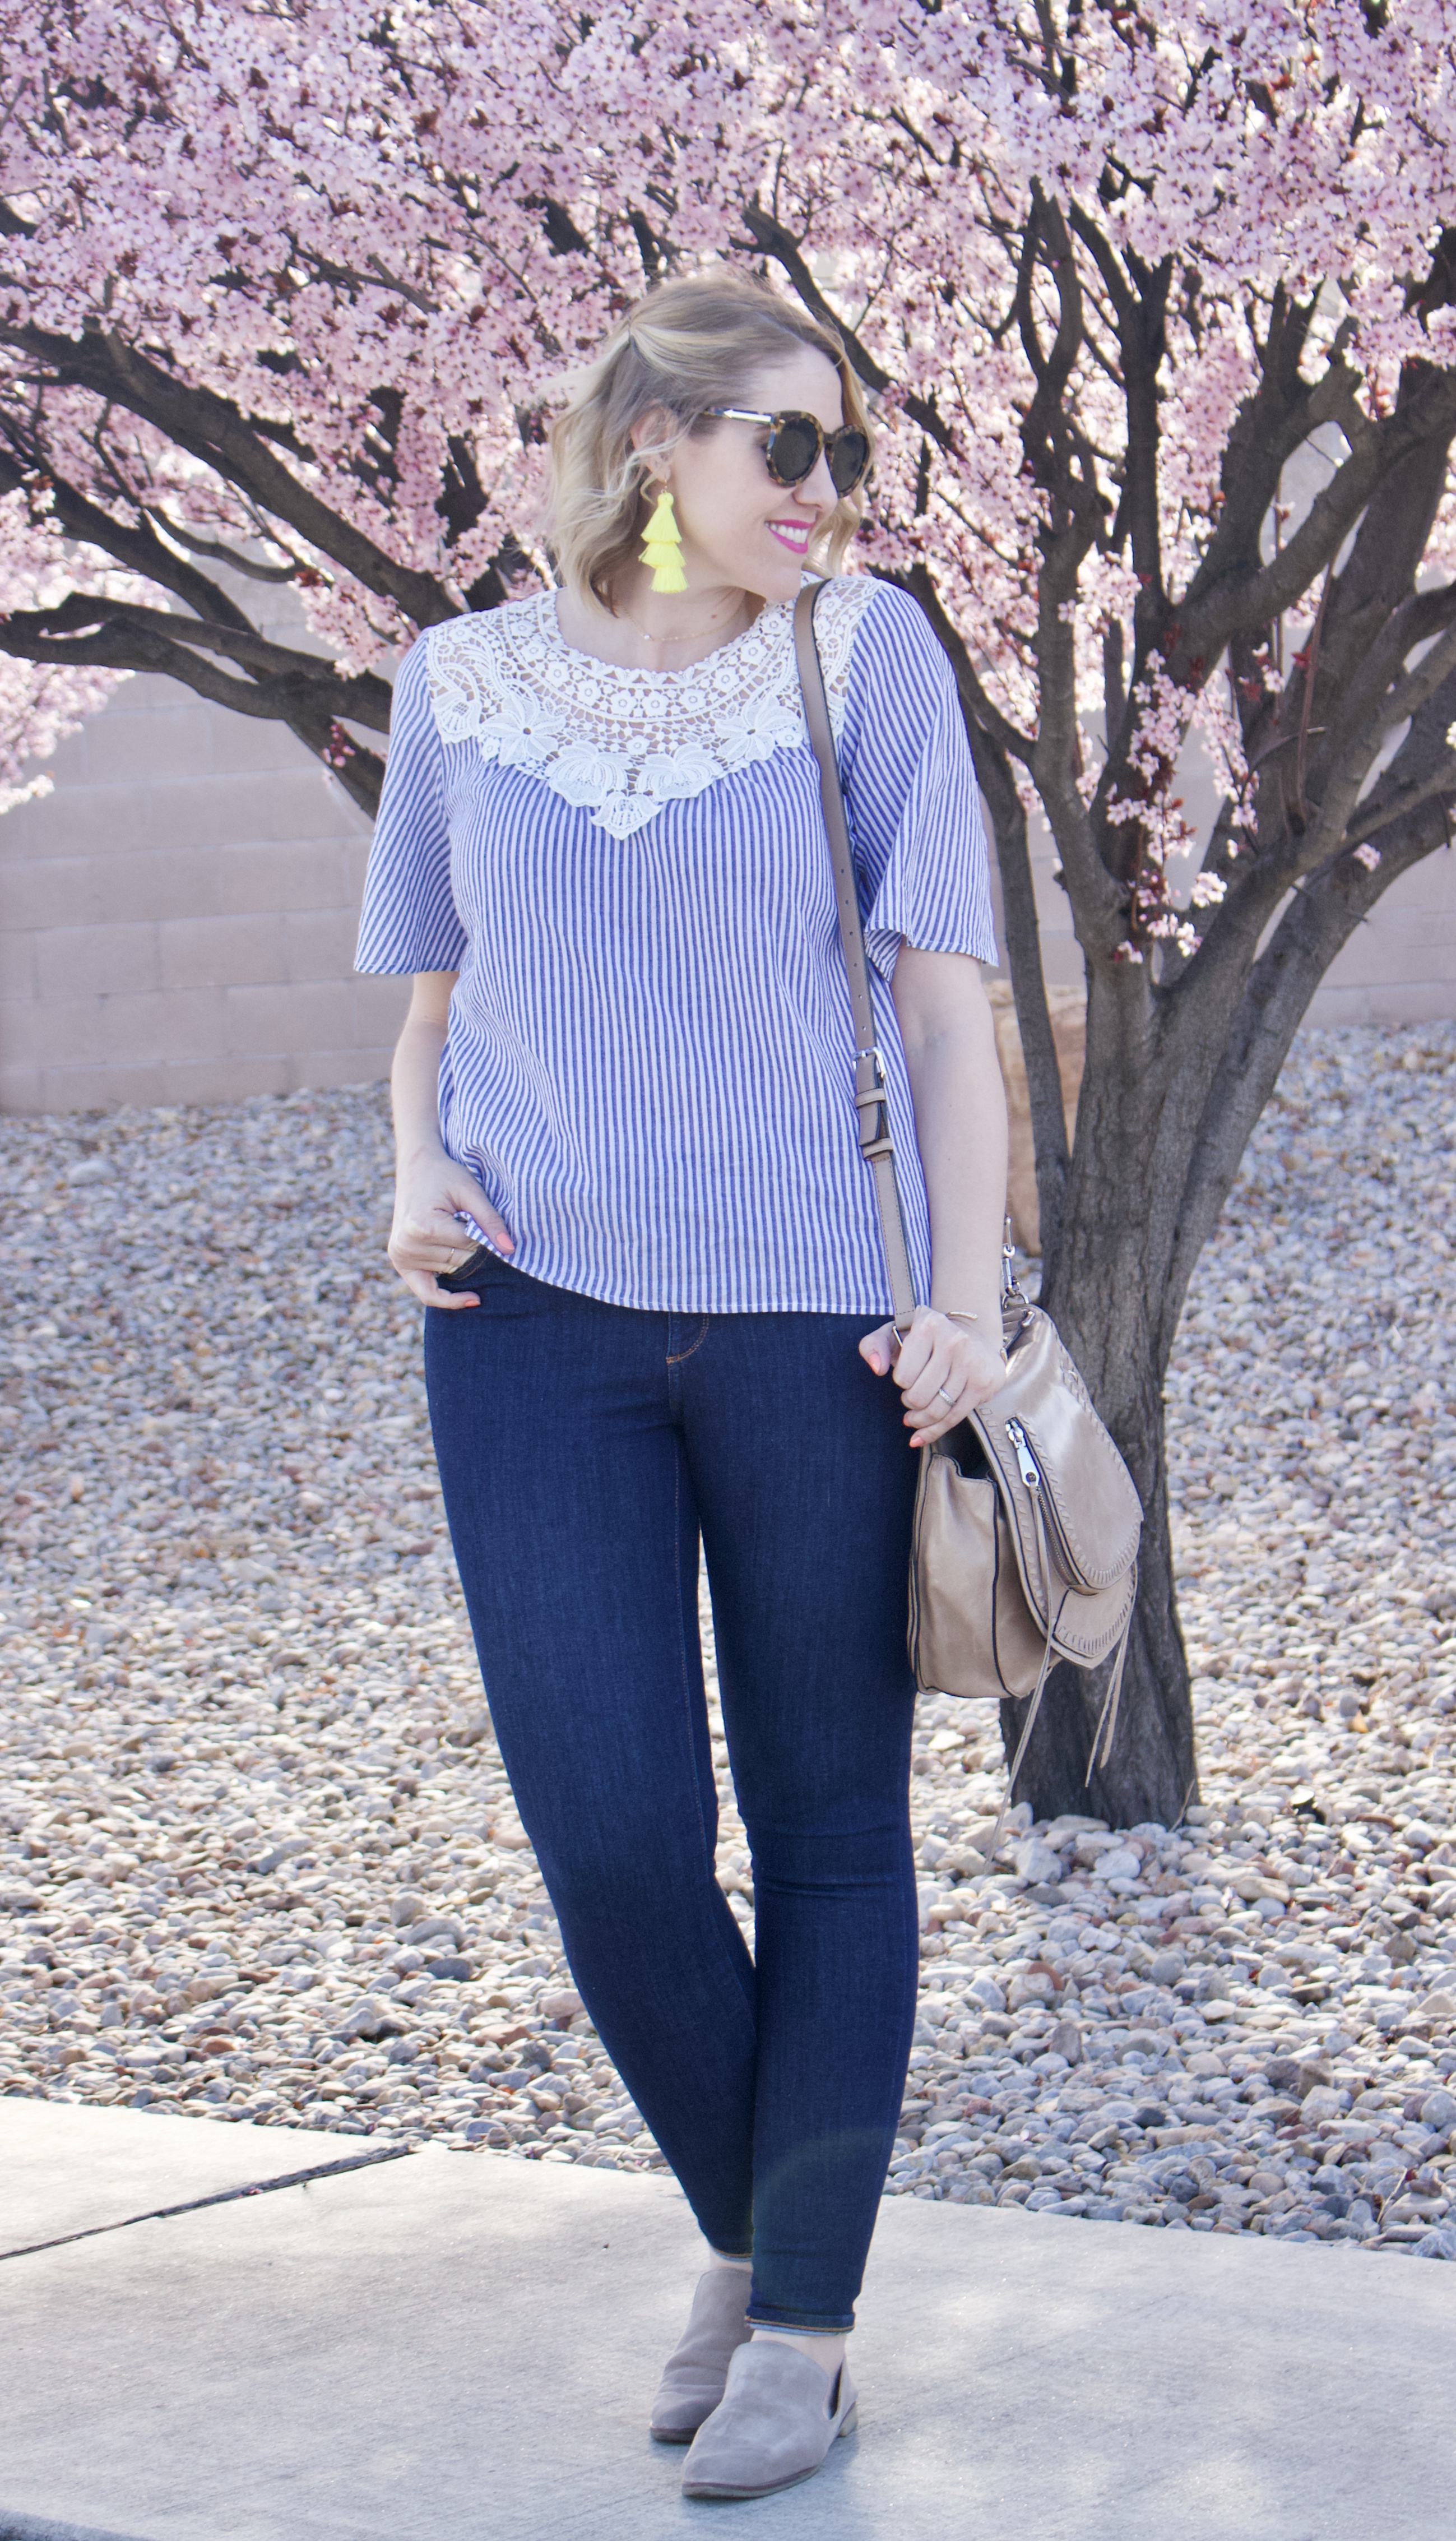 stripes and lace for the weekly style edit link up #linkup #fashionlinkup #pinkblush